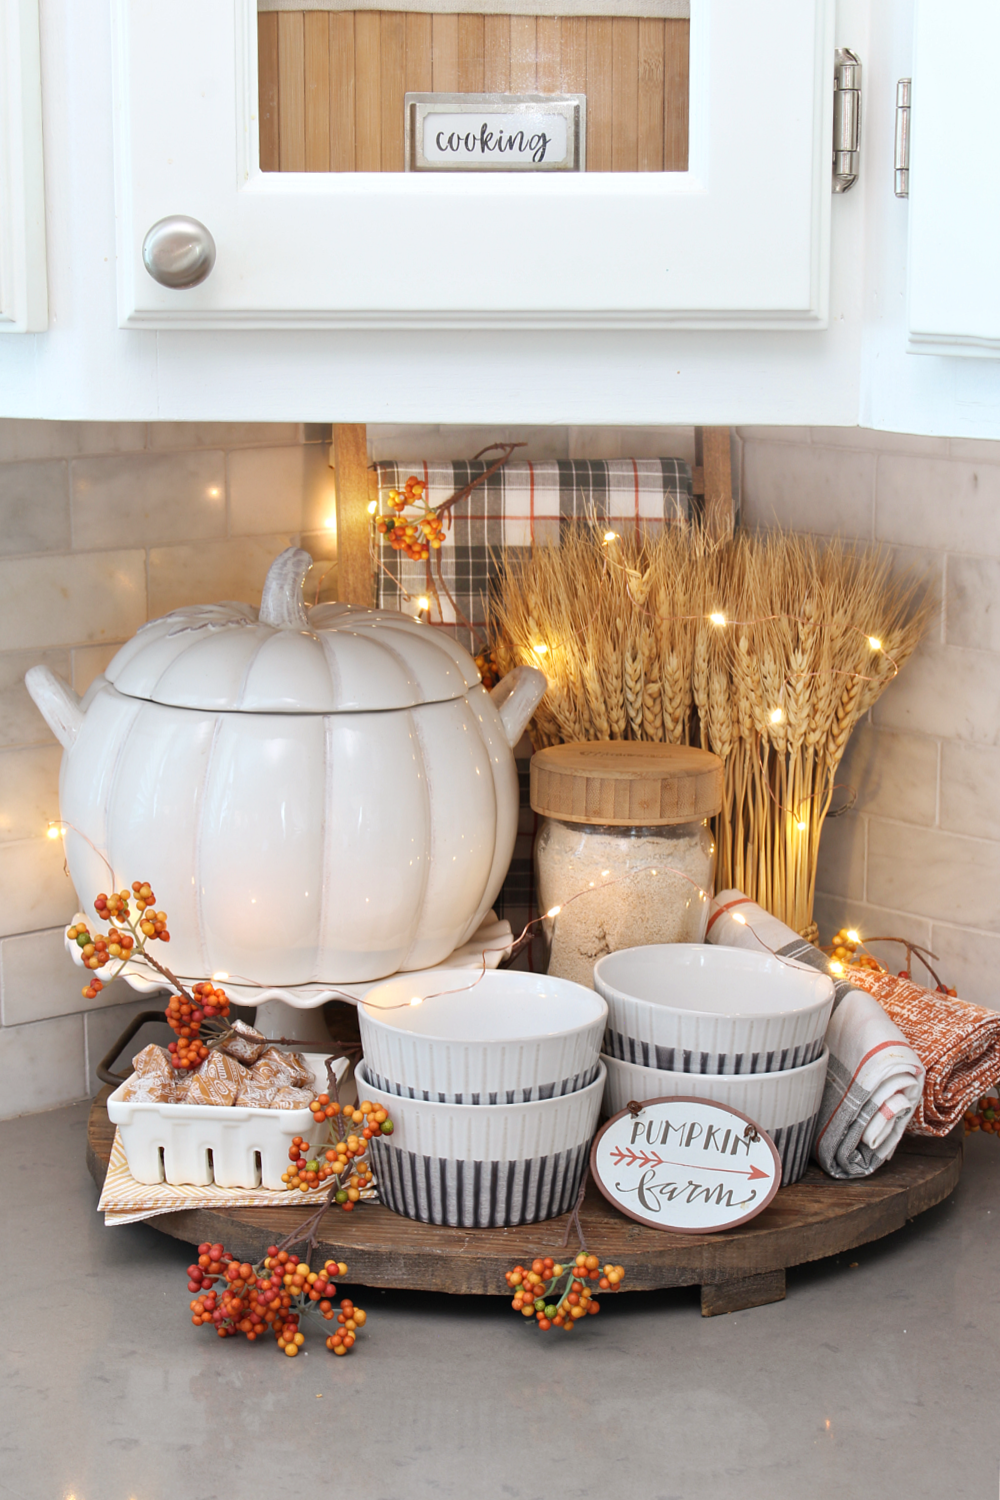 Autumn vignette in kitchen with twinkling lights.